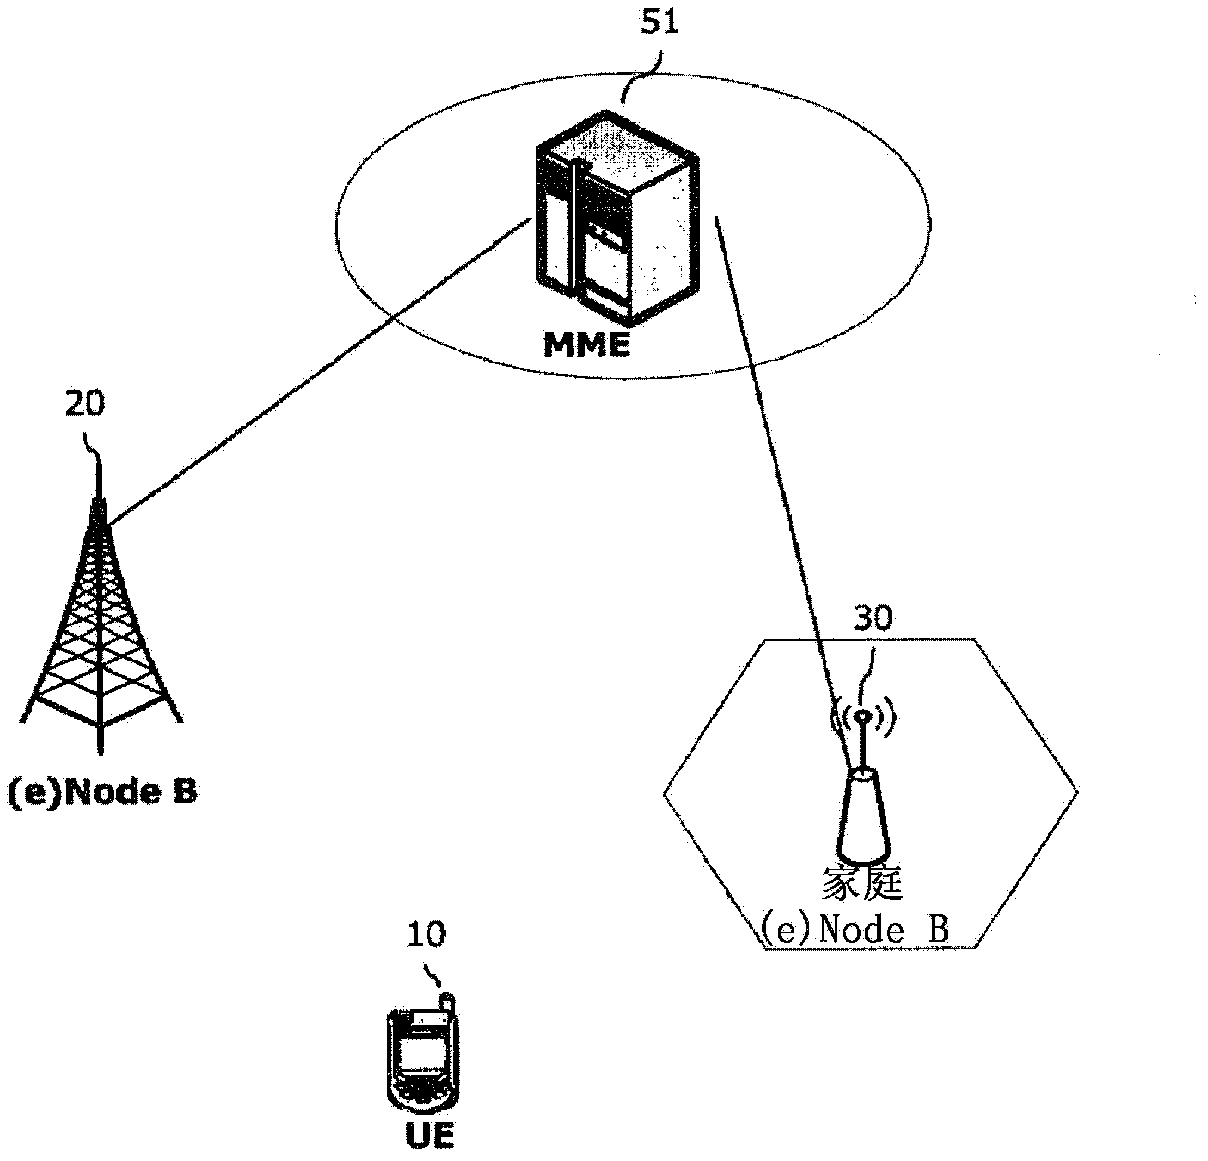 Optimized paging method at home (e)nodeb system